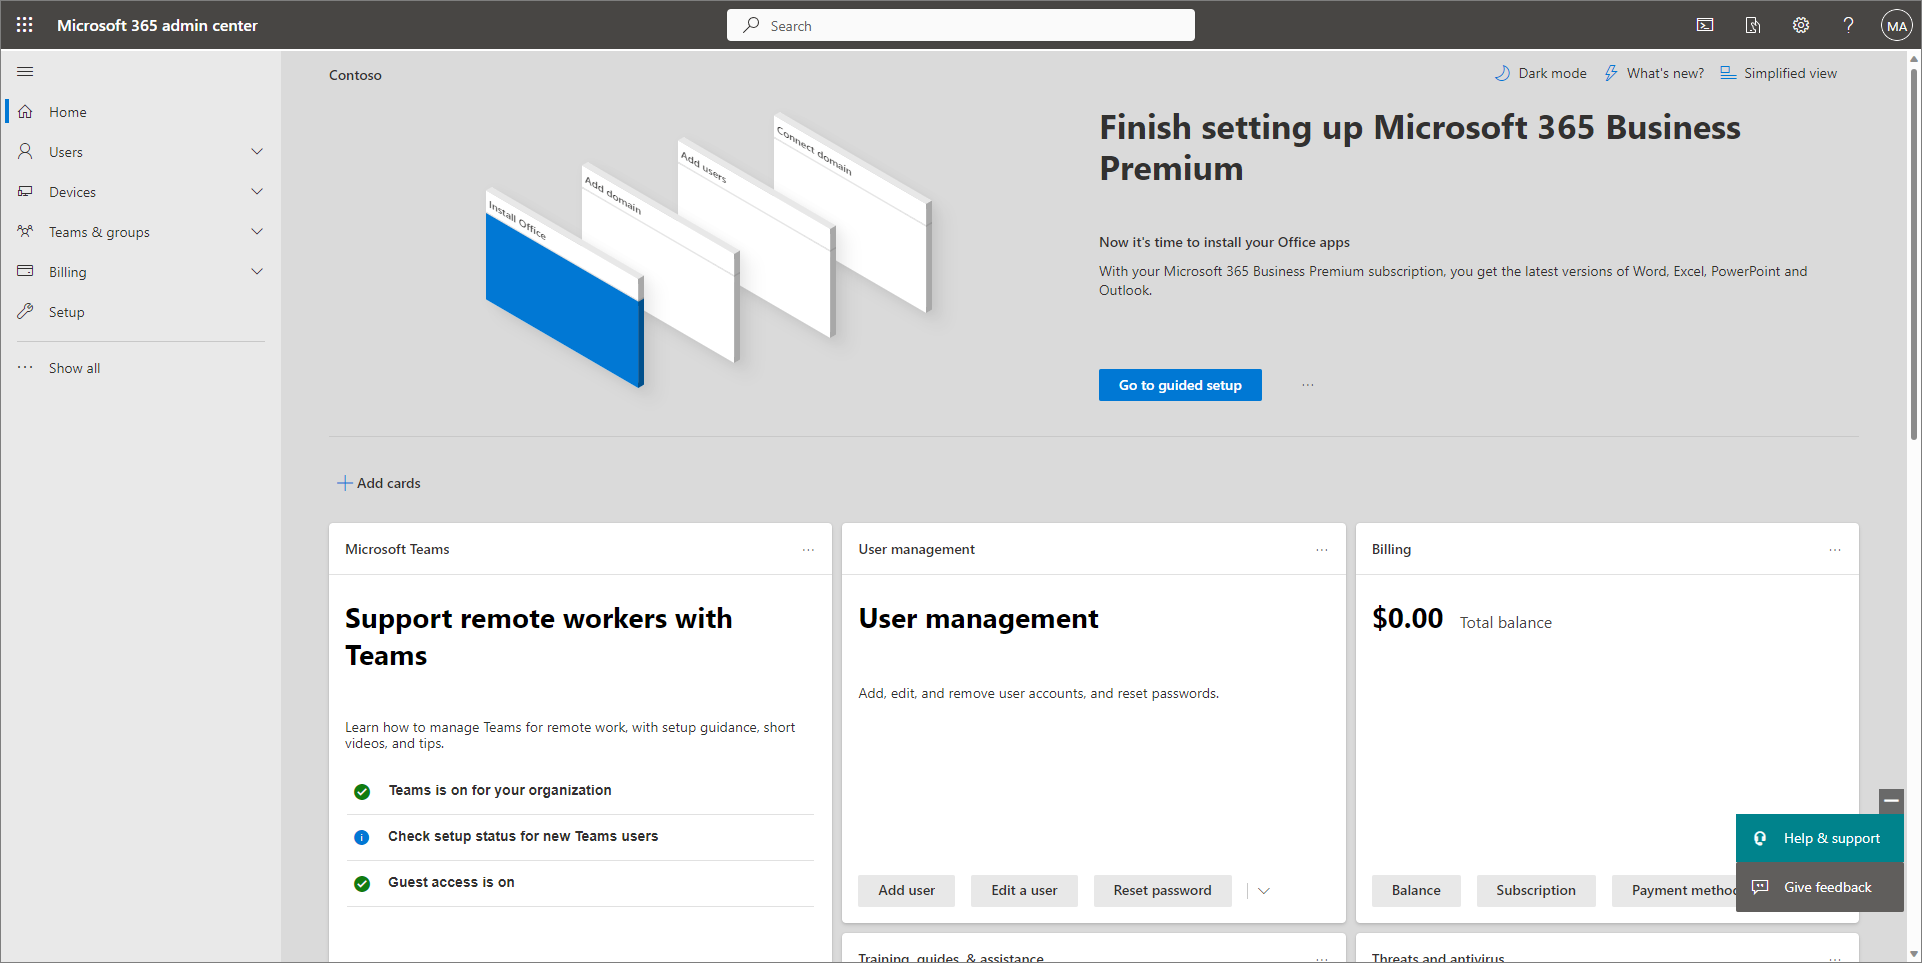 Screenshot of the dashboard view of the Microsoft 365 admin center.